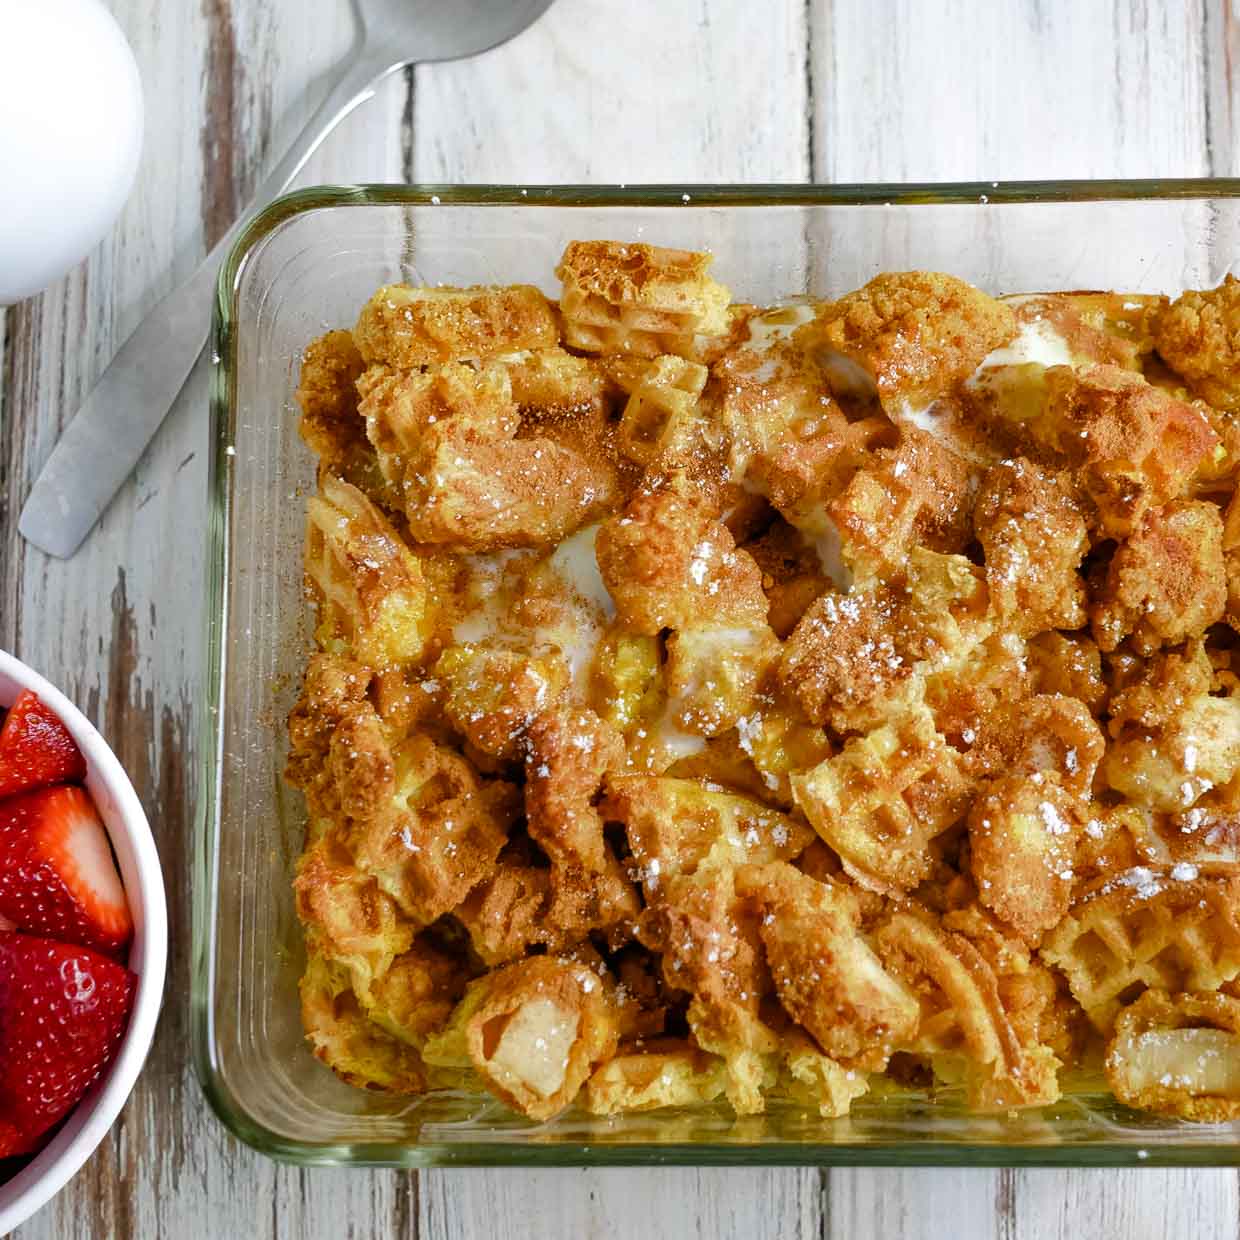 Piece of chicken and waffle casserole on a plate.